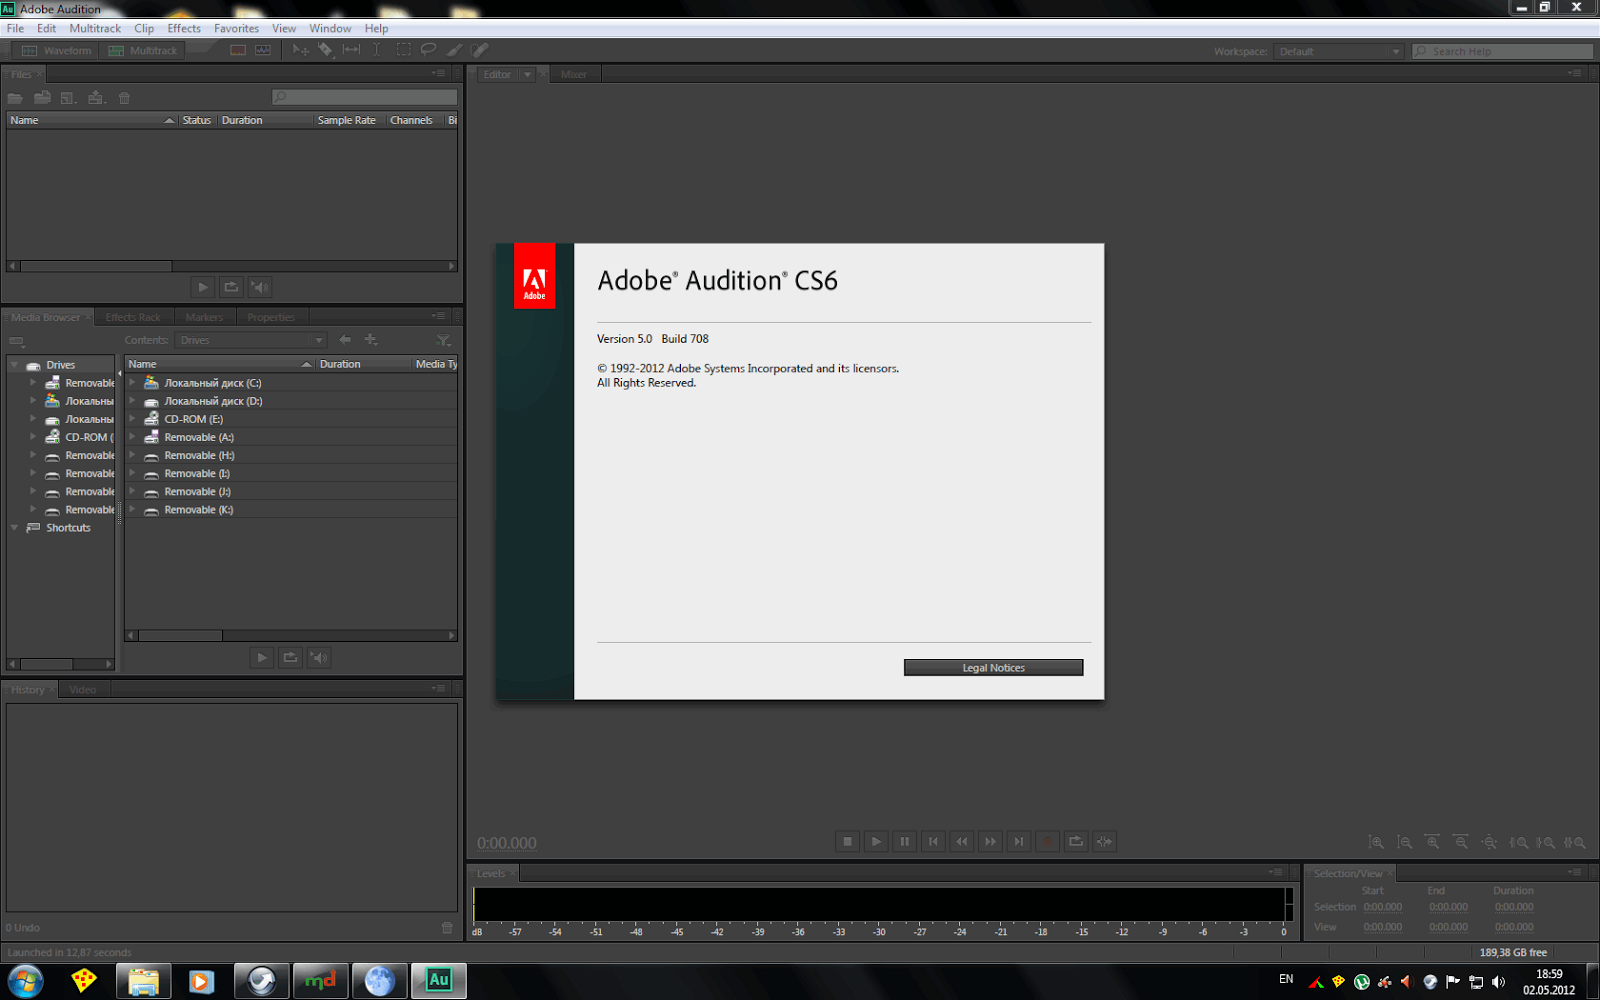 Adobe audition 2.0 full version with crack